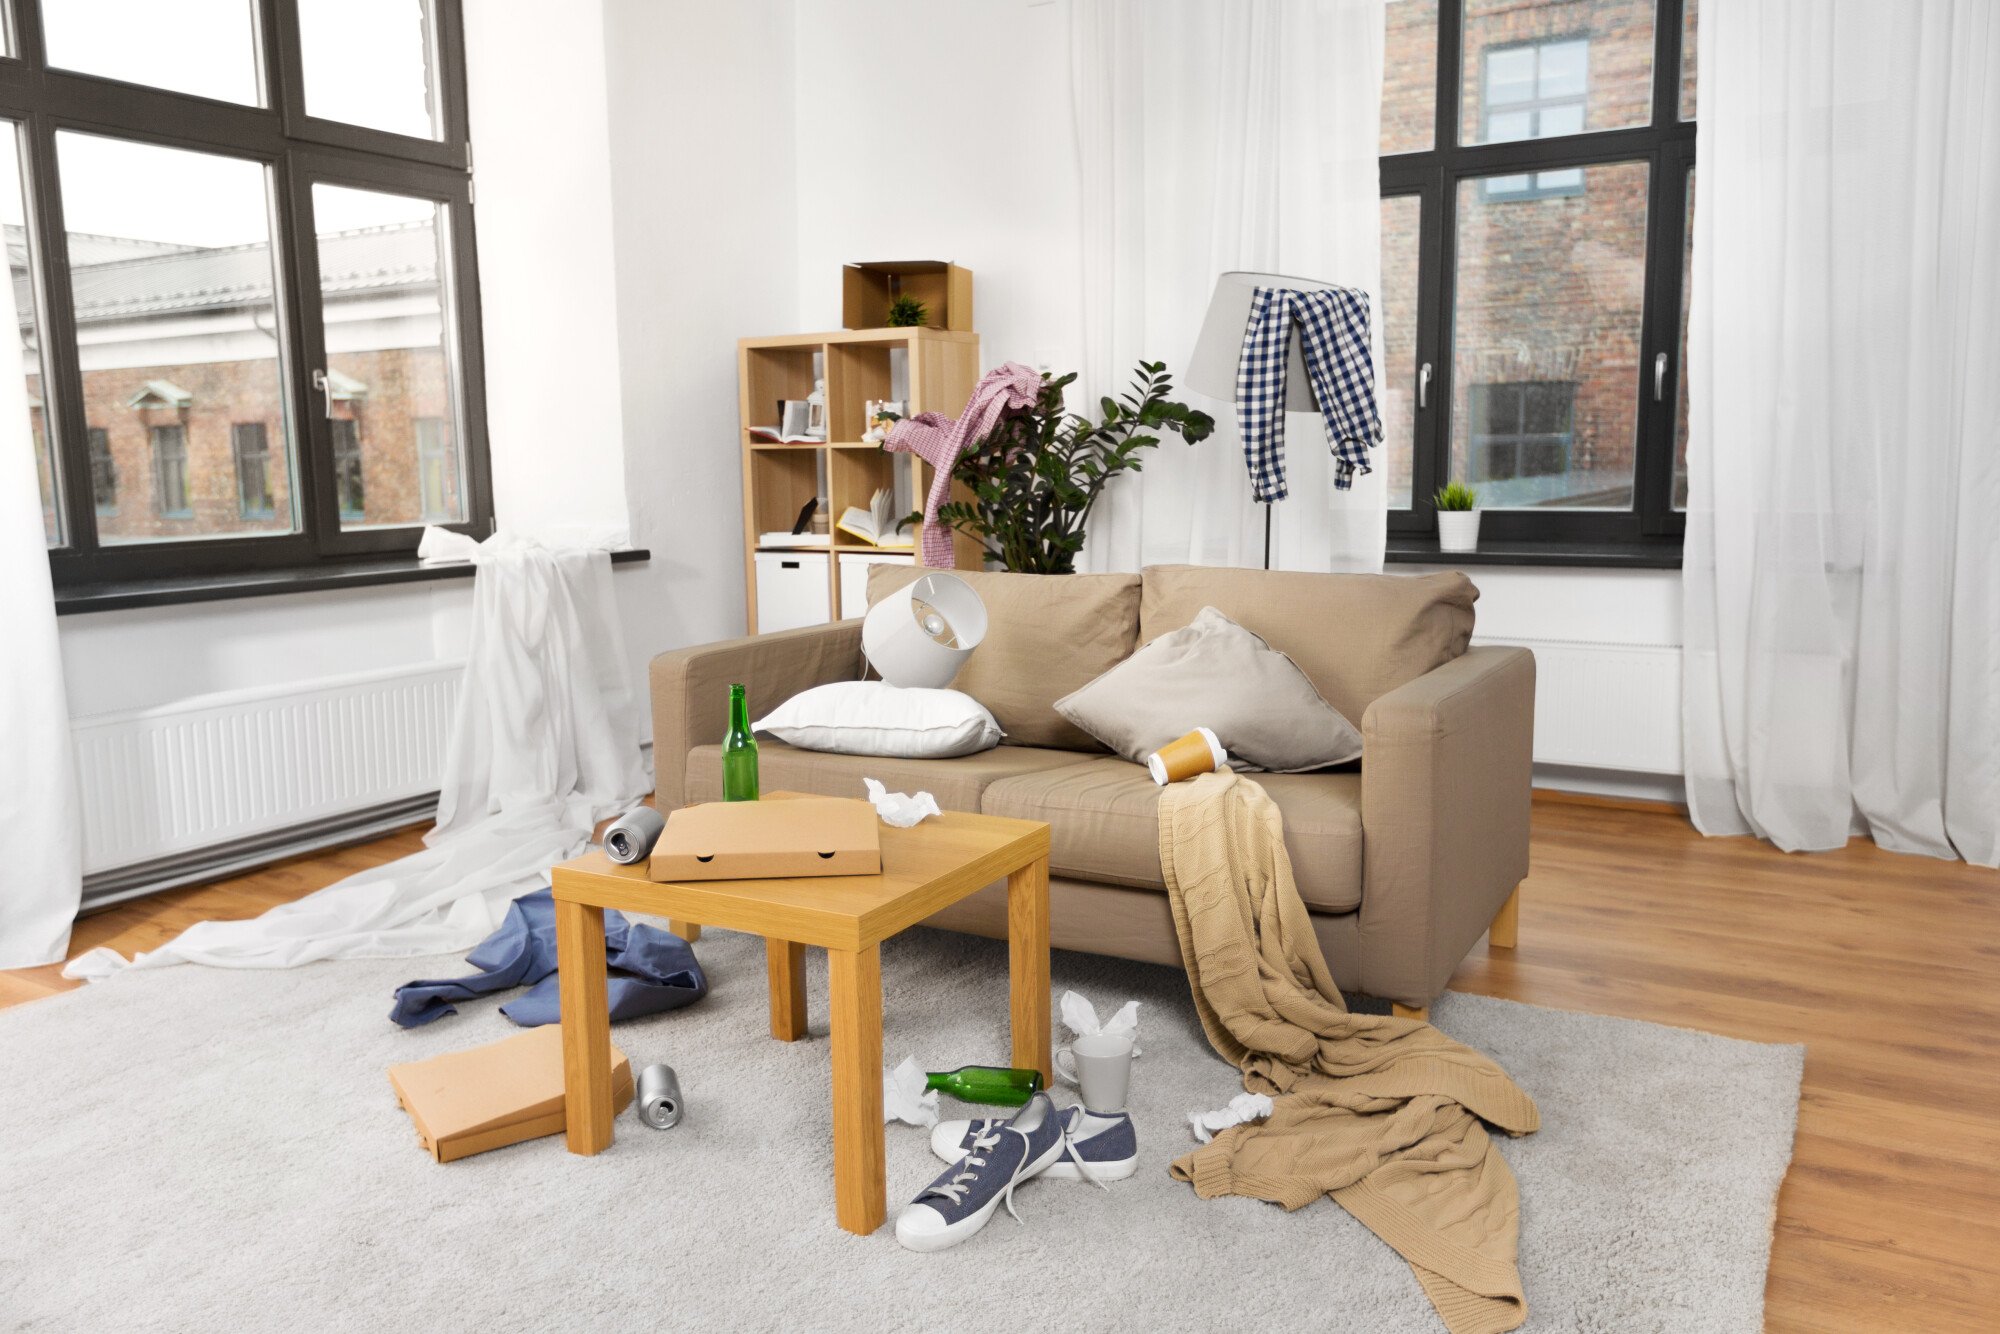 Can You Rely on Landlord Insurance if a Tenant Damages Your Property?